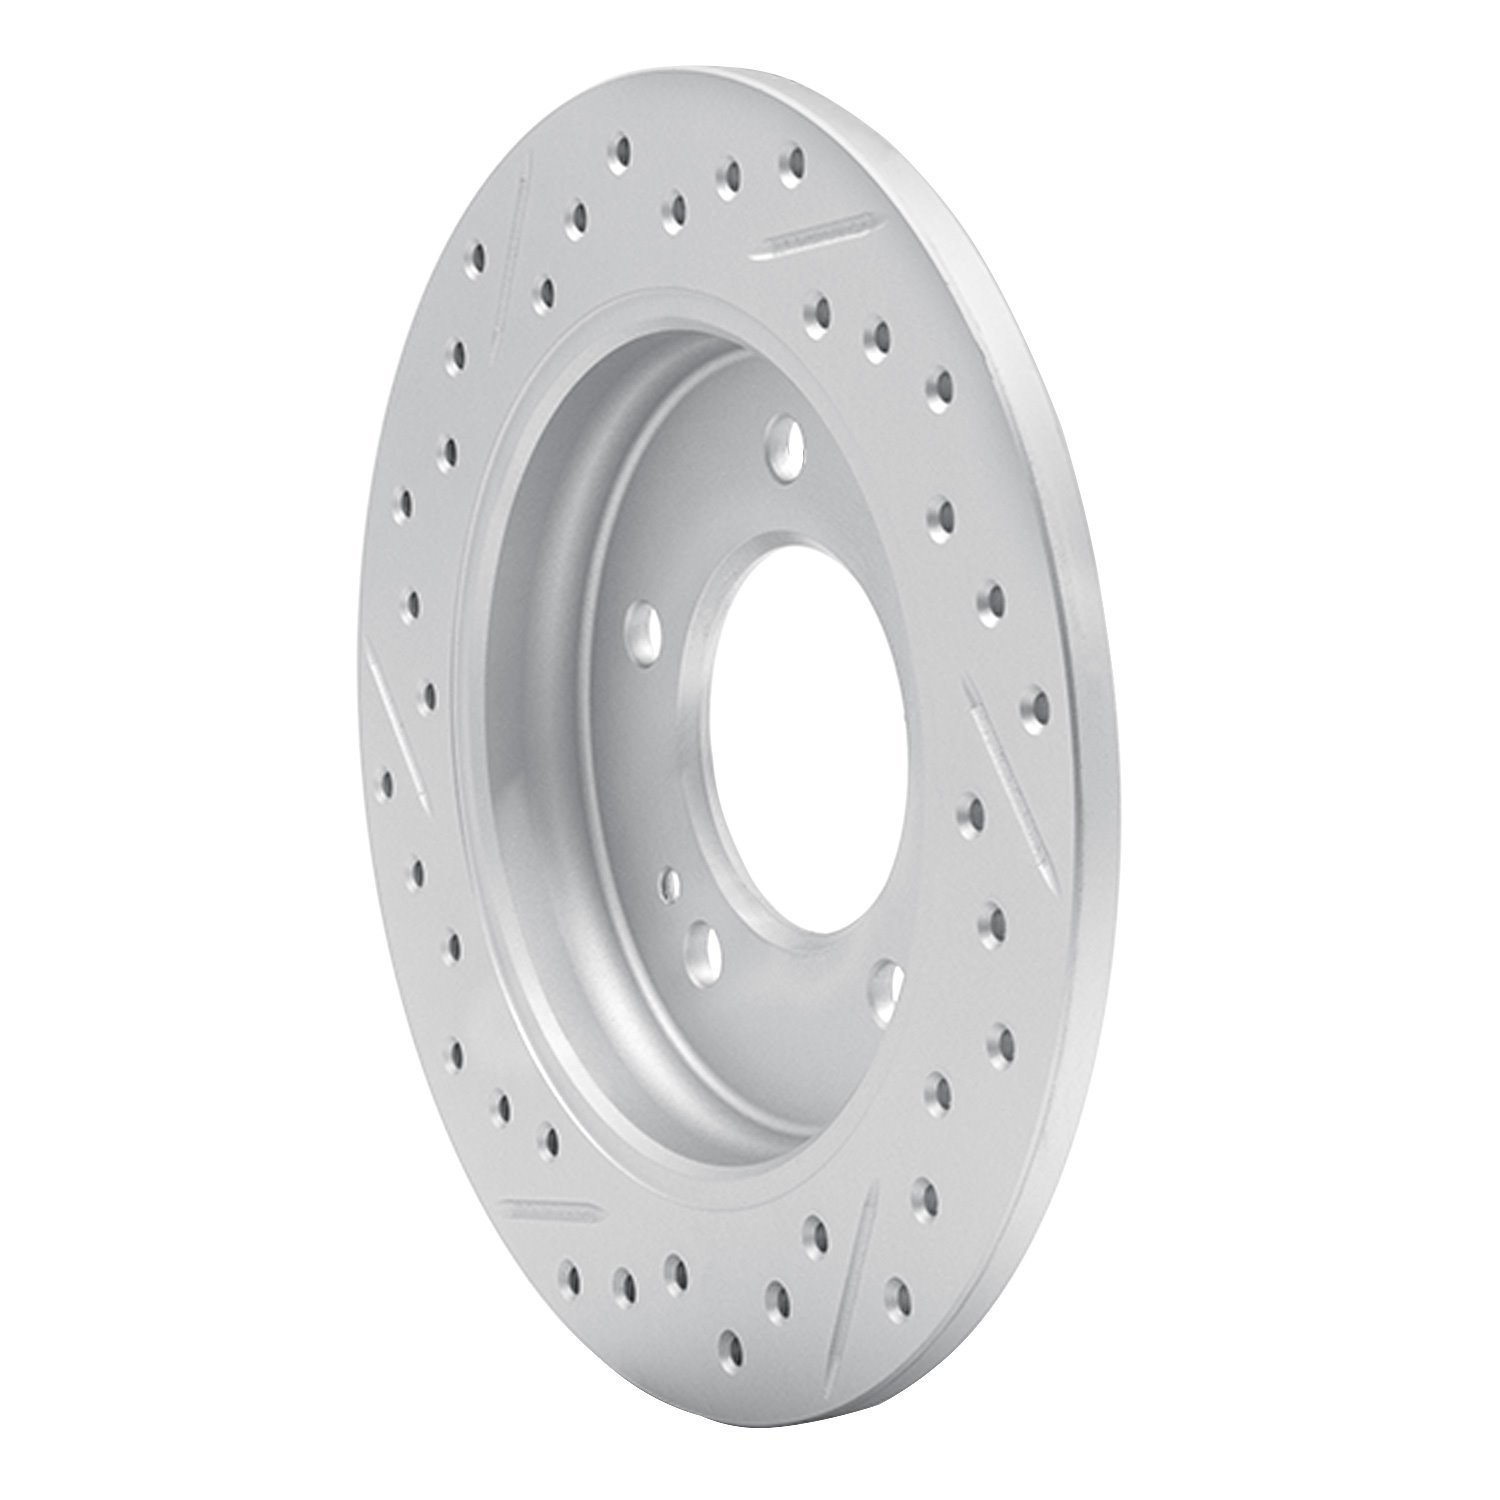 830-21034R Geoperformance Drilled/Slotted Brake Rotor, Fits Select Kia/Hyundai/Genesis, Position: Rear Right